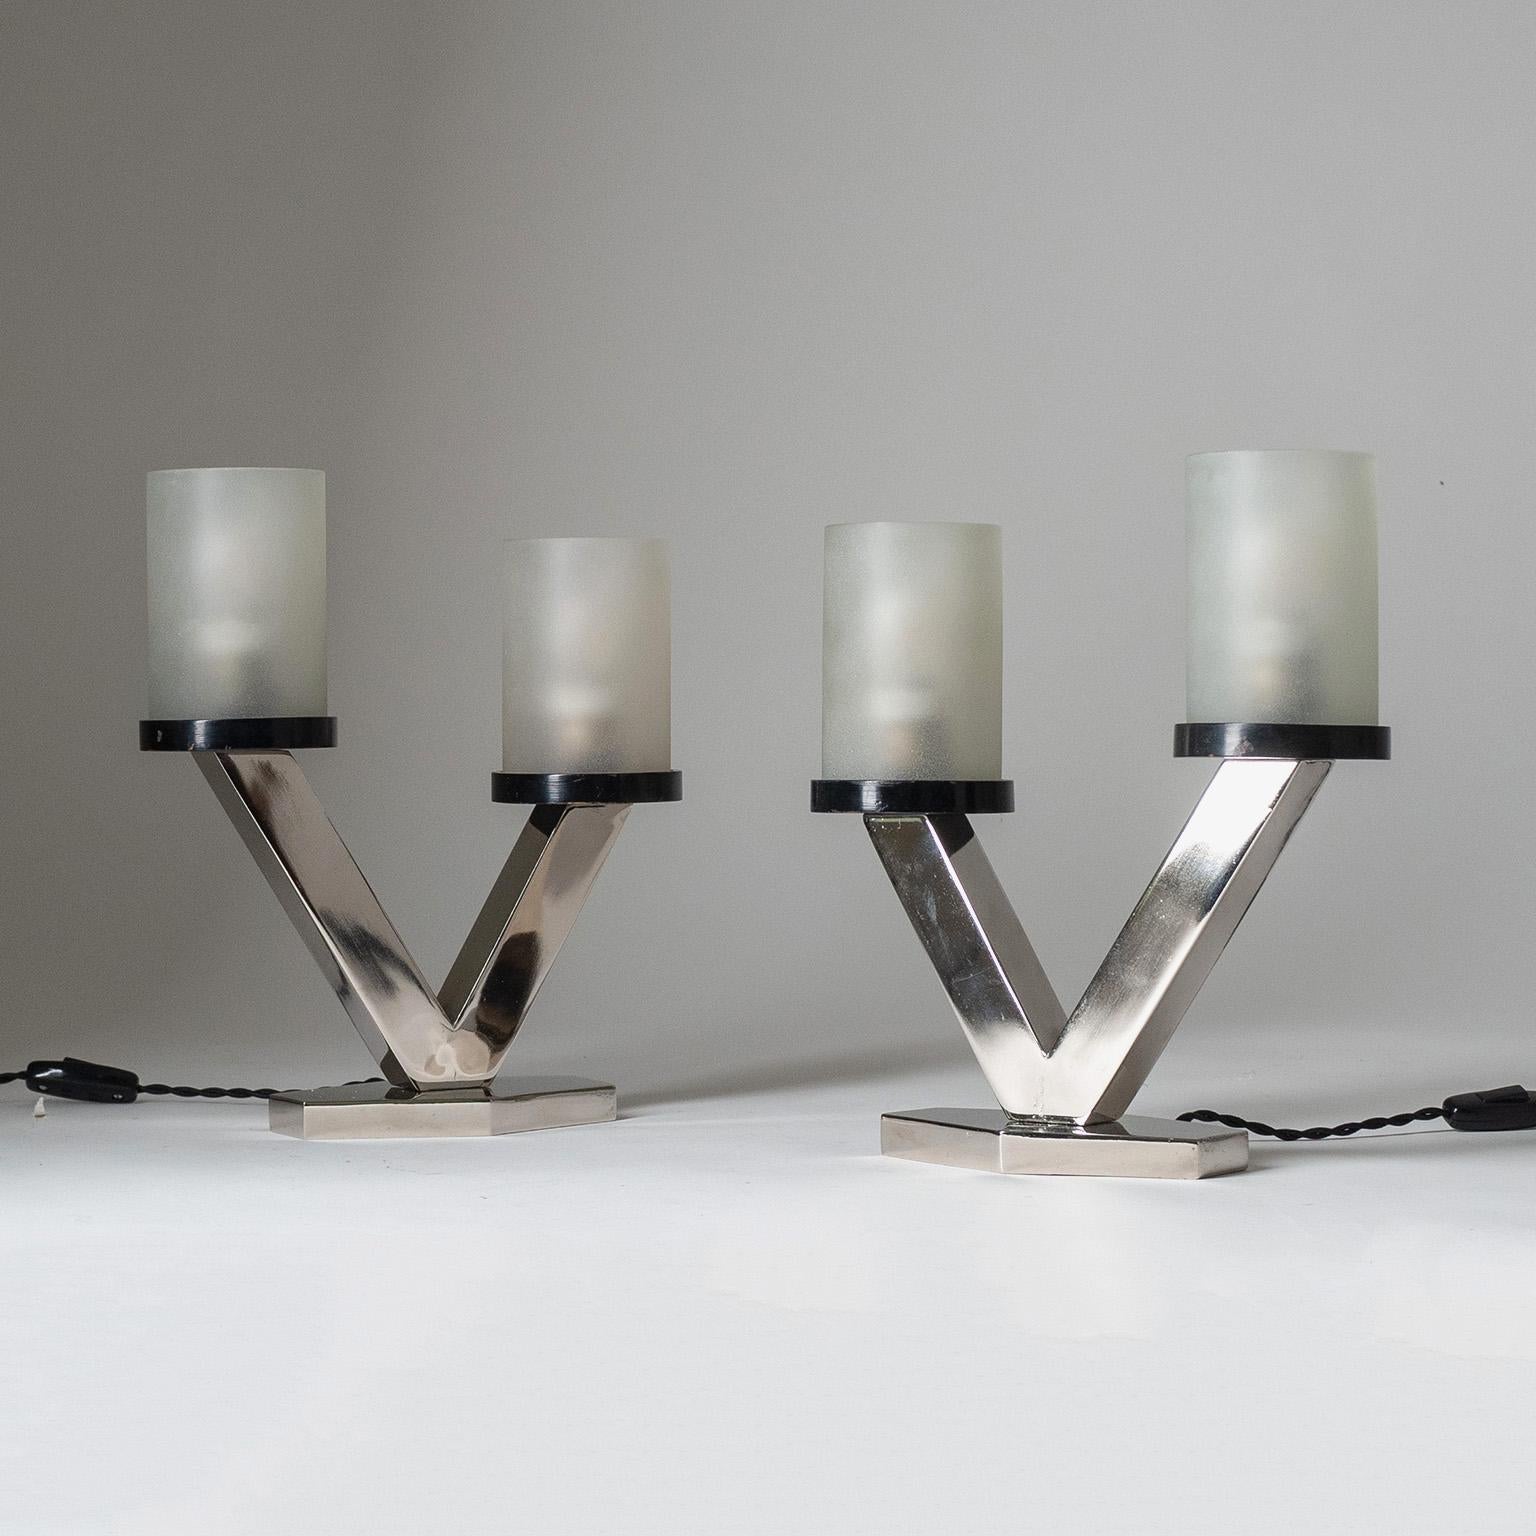 Rare pair of nickeled Art Deco table lamps with frosted glass diffusers from the 1920s. Clean geometric design with a nice asymmetric touch. Nickeled steel base with two asymmetric arms, each holding a lacquered wood disc which supports a thick